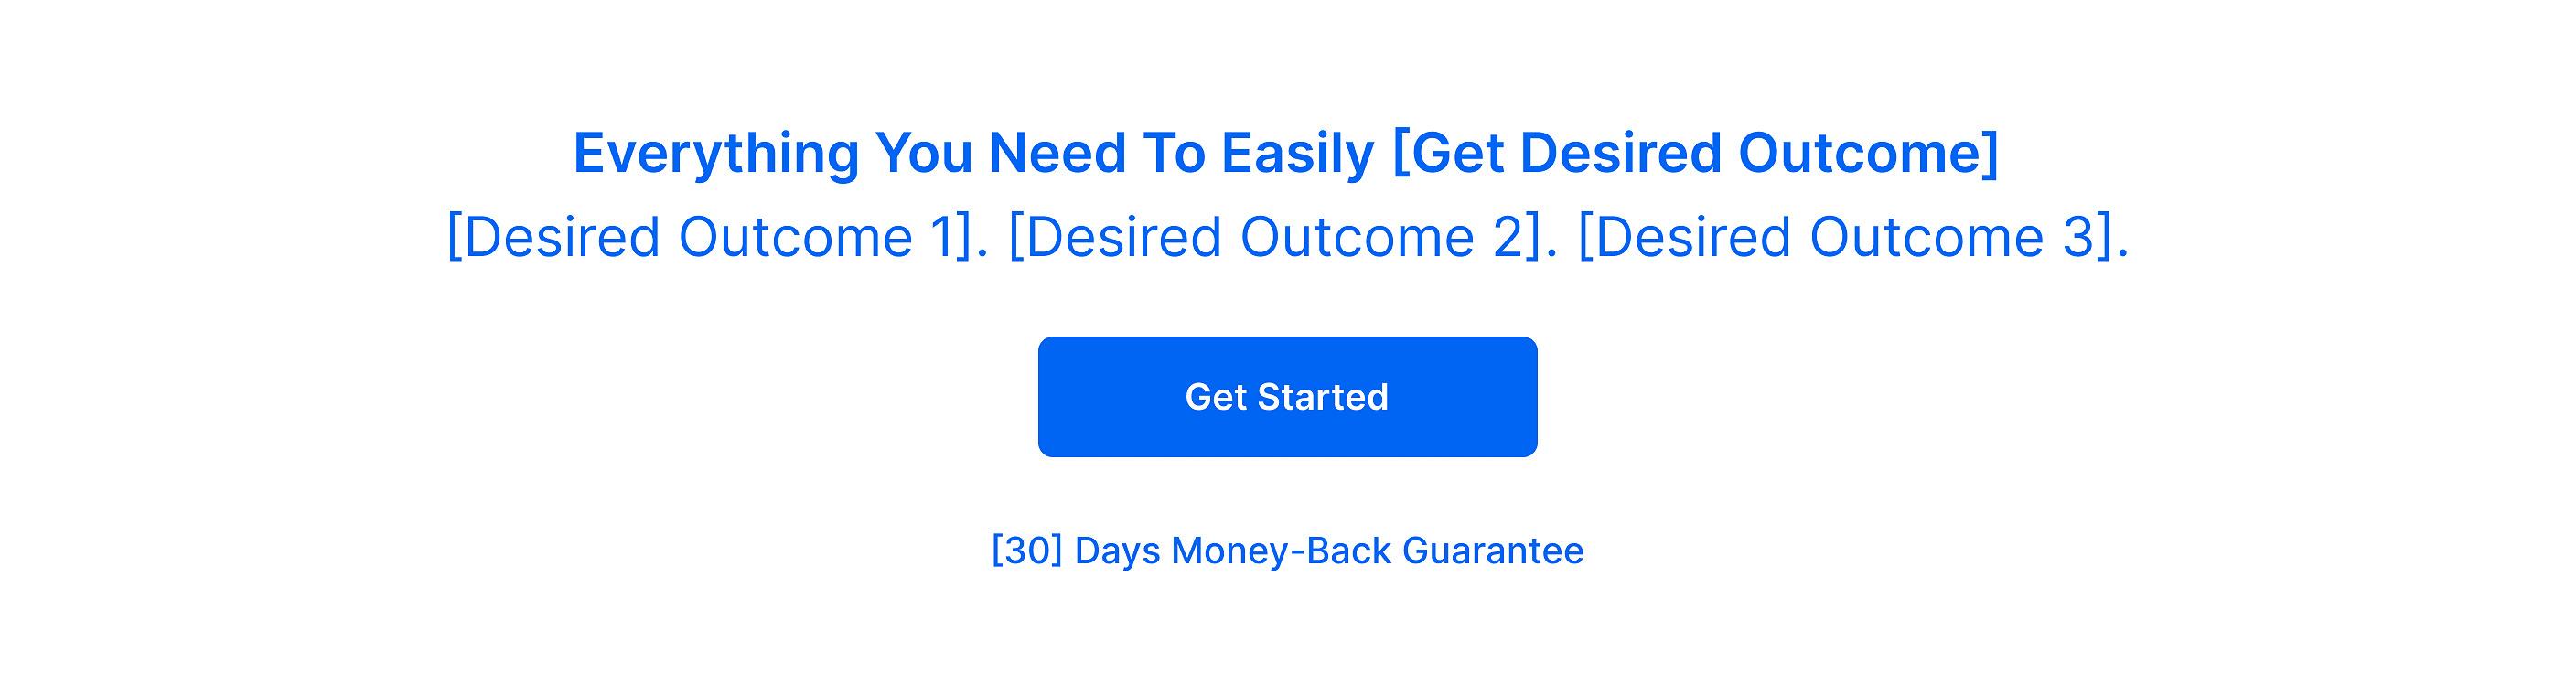 Blueprint of everything you need to easily get desired outcome